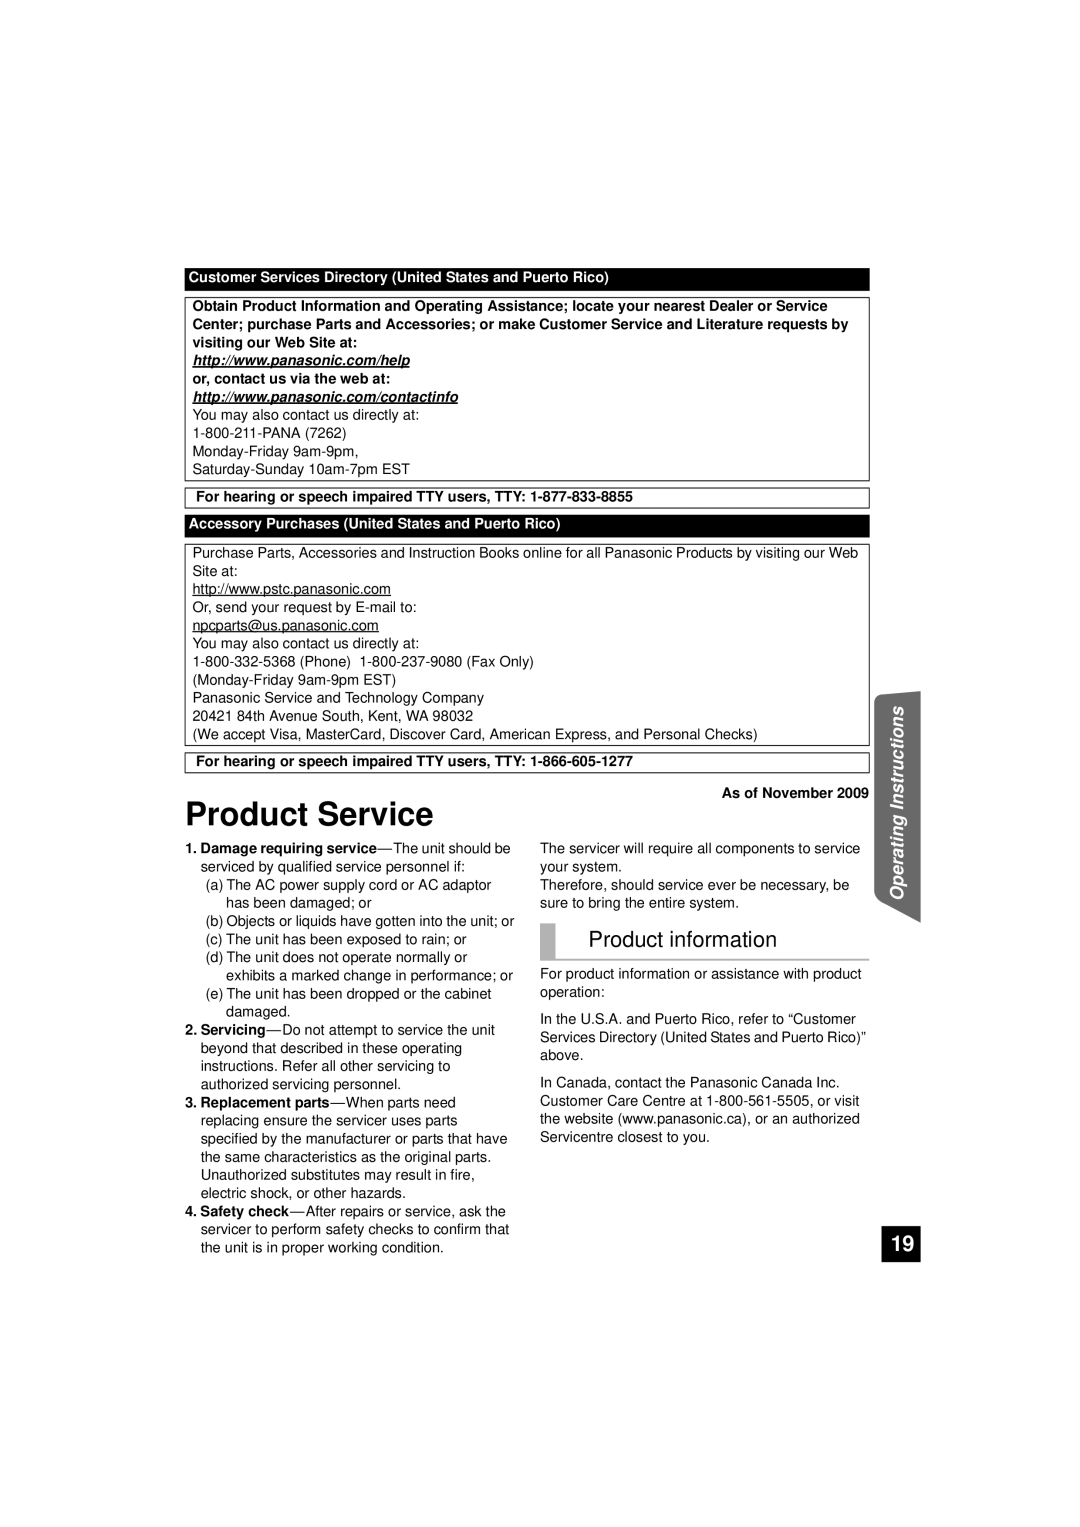 Panasonic RQTX1165-1P, SC-HTB10 operating instructions Product Service, Product information, Instructions, Operating 